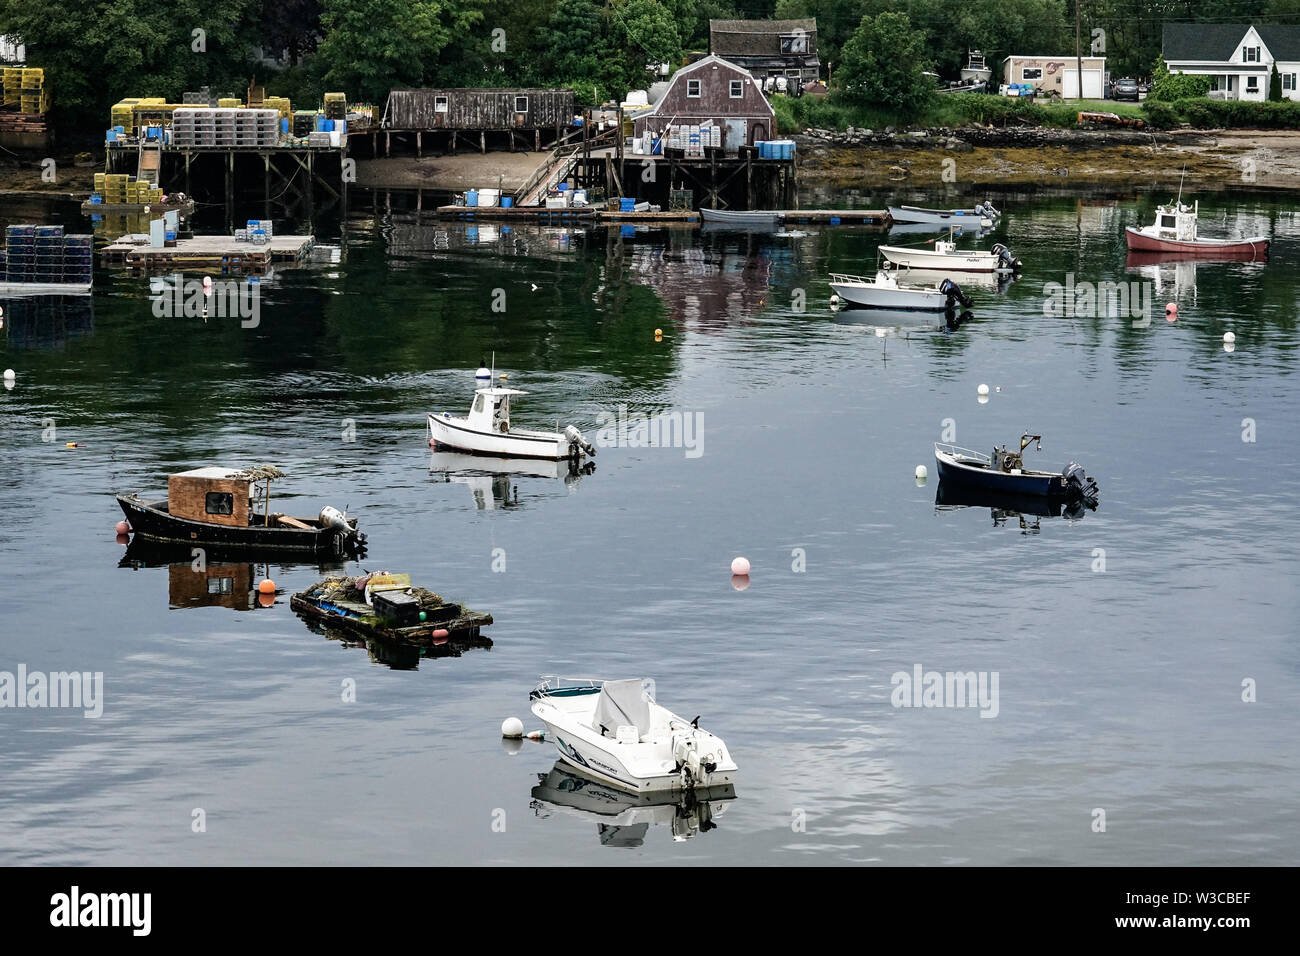 Lobster fishing boats moored in Mackerel Cove on Bailey Island on a summers day in Harpswell, Maine. Stock Photo